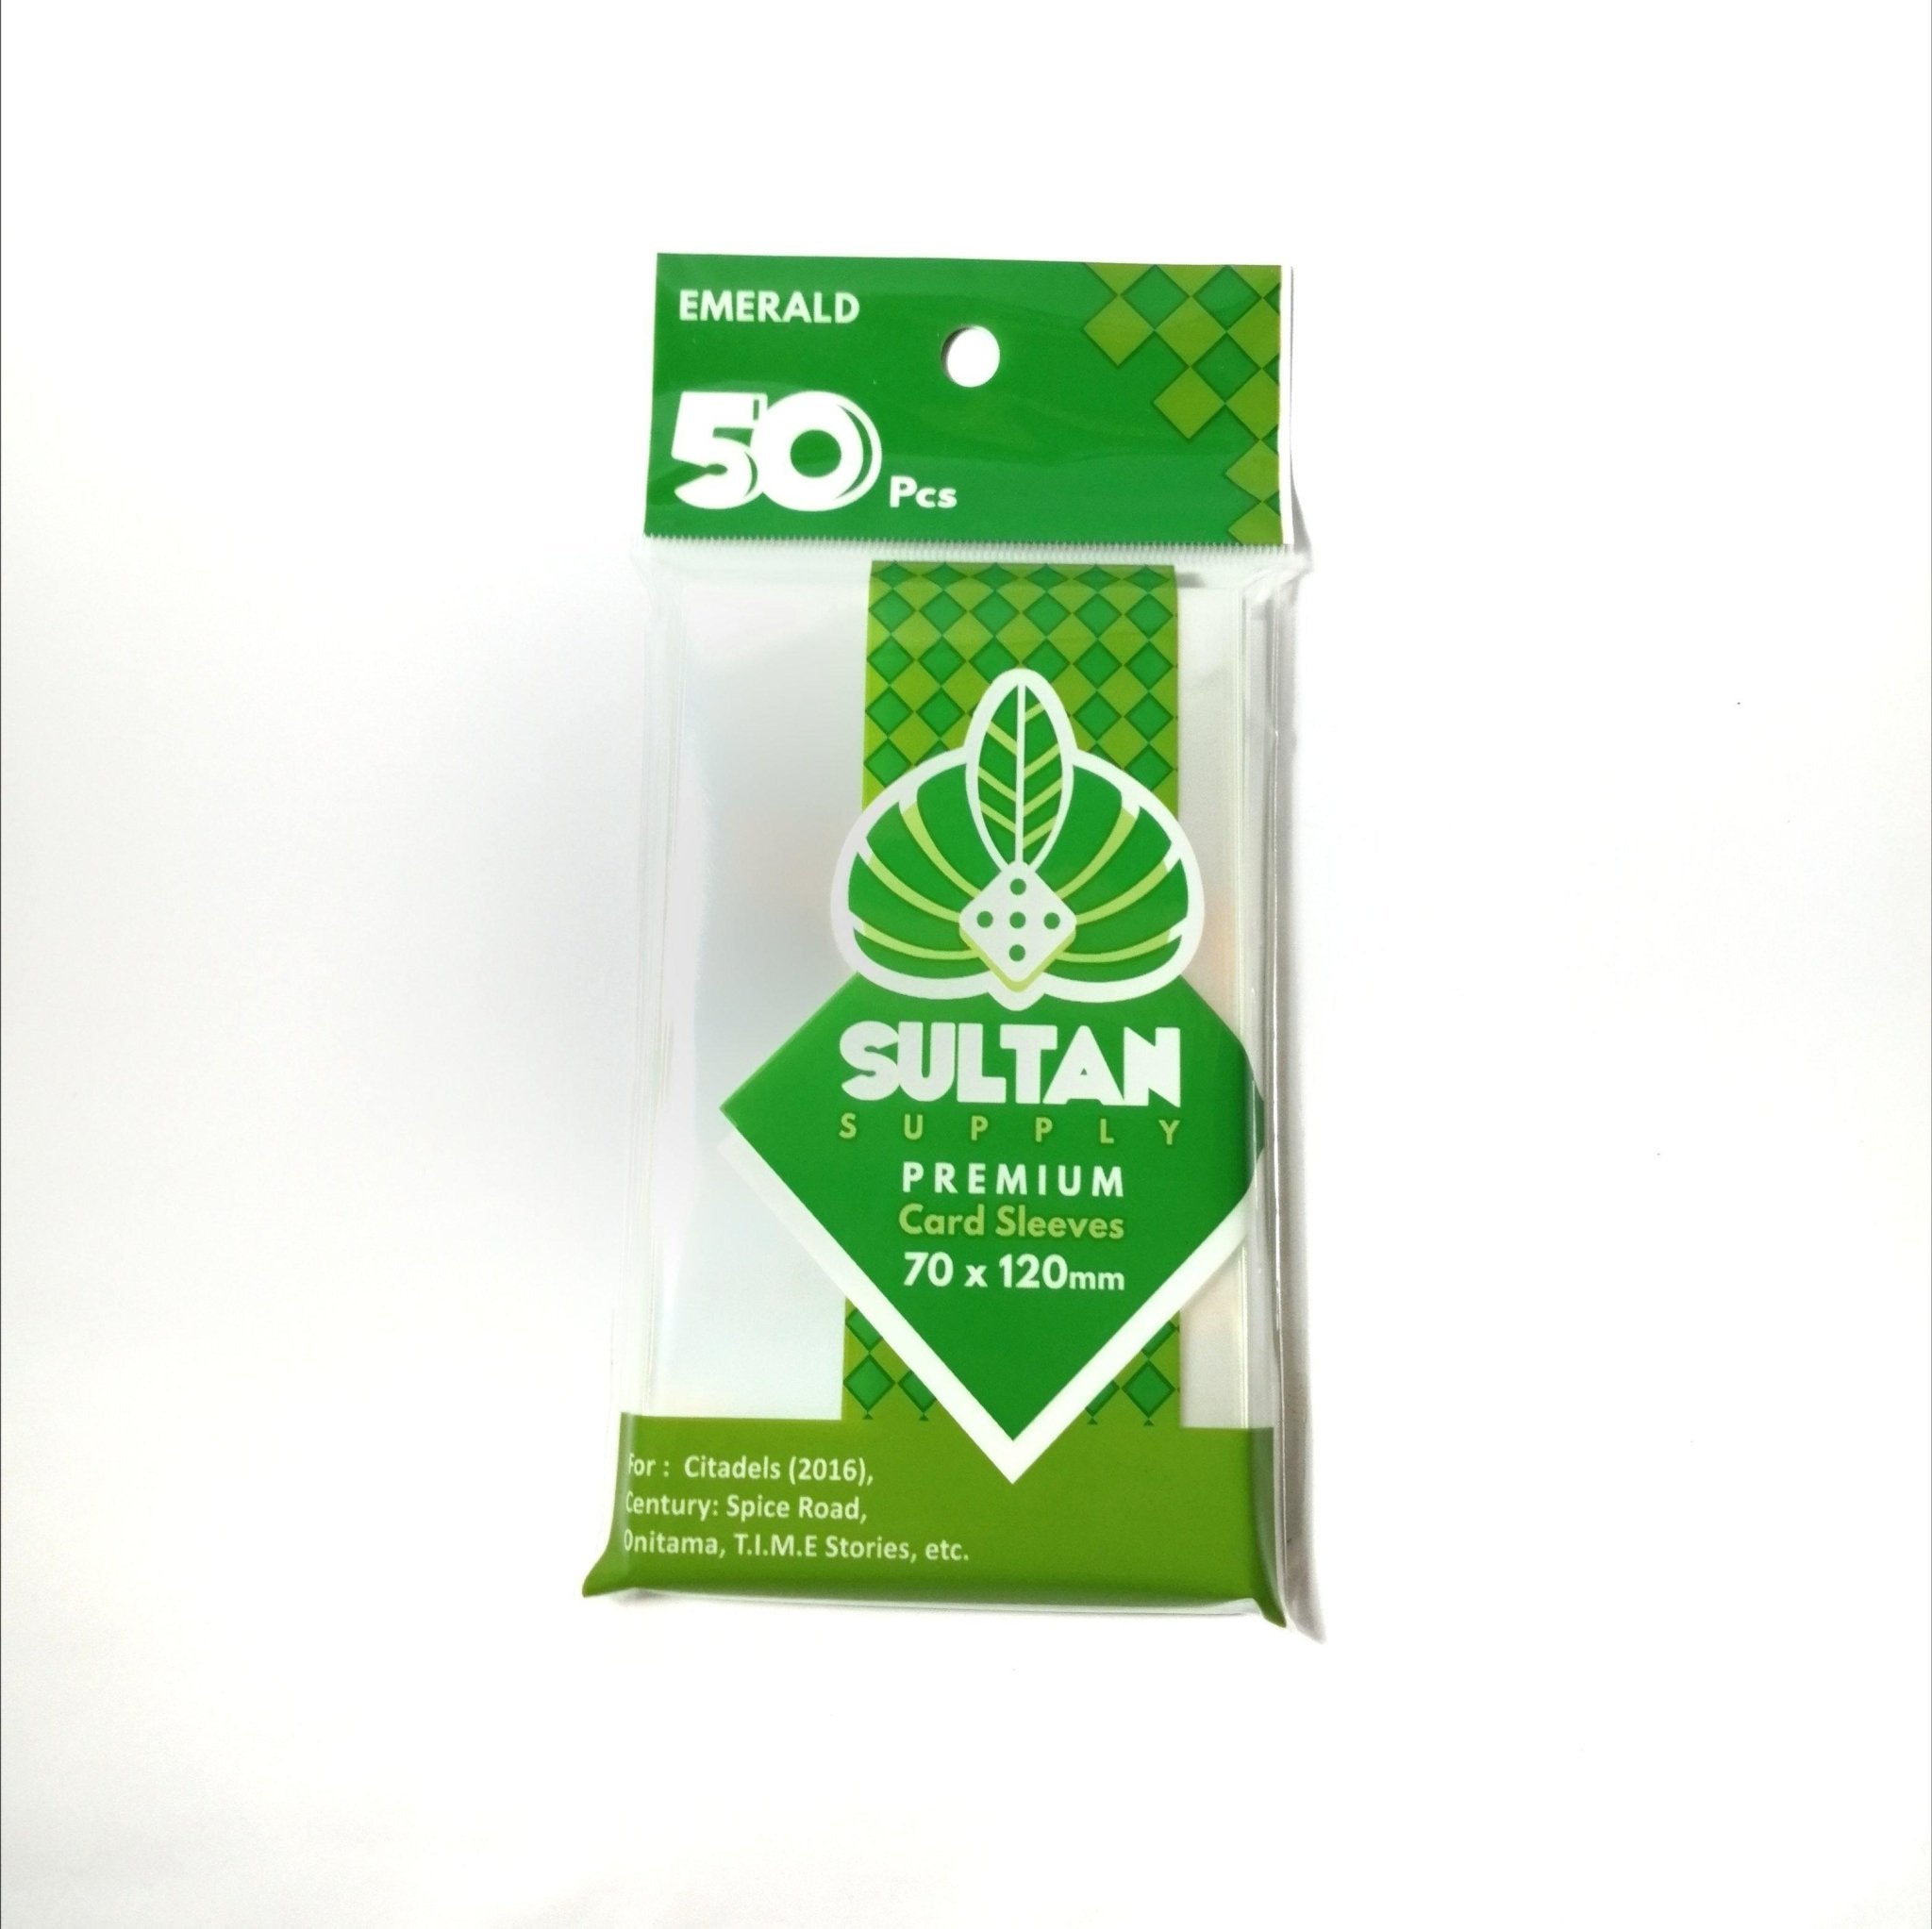 Sultan Supply Premium Card Sleeves: 70 x 120 mm Tarot Emerald (90 microns) - Gaming Library